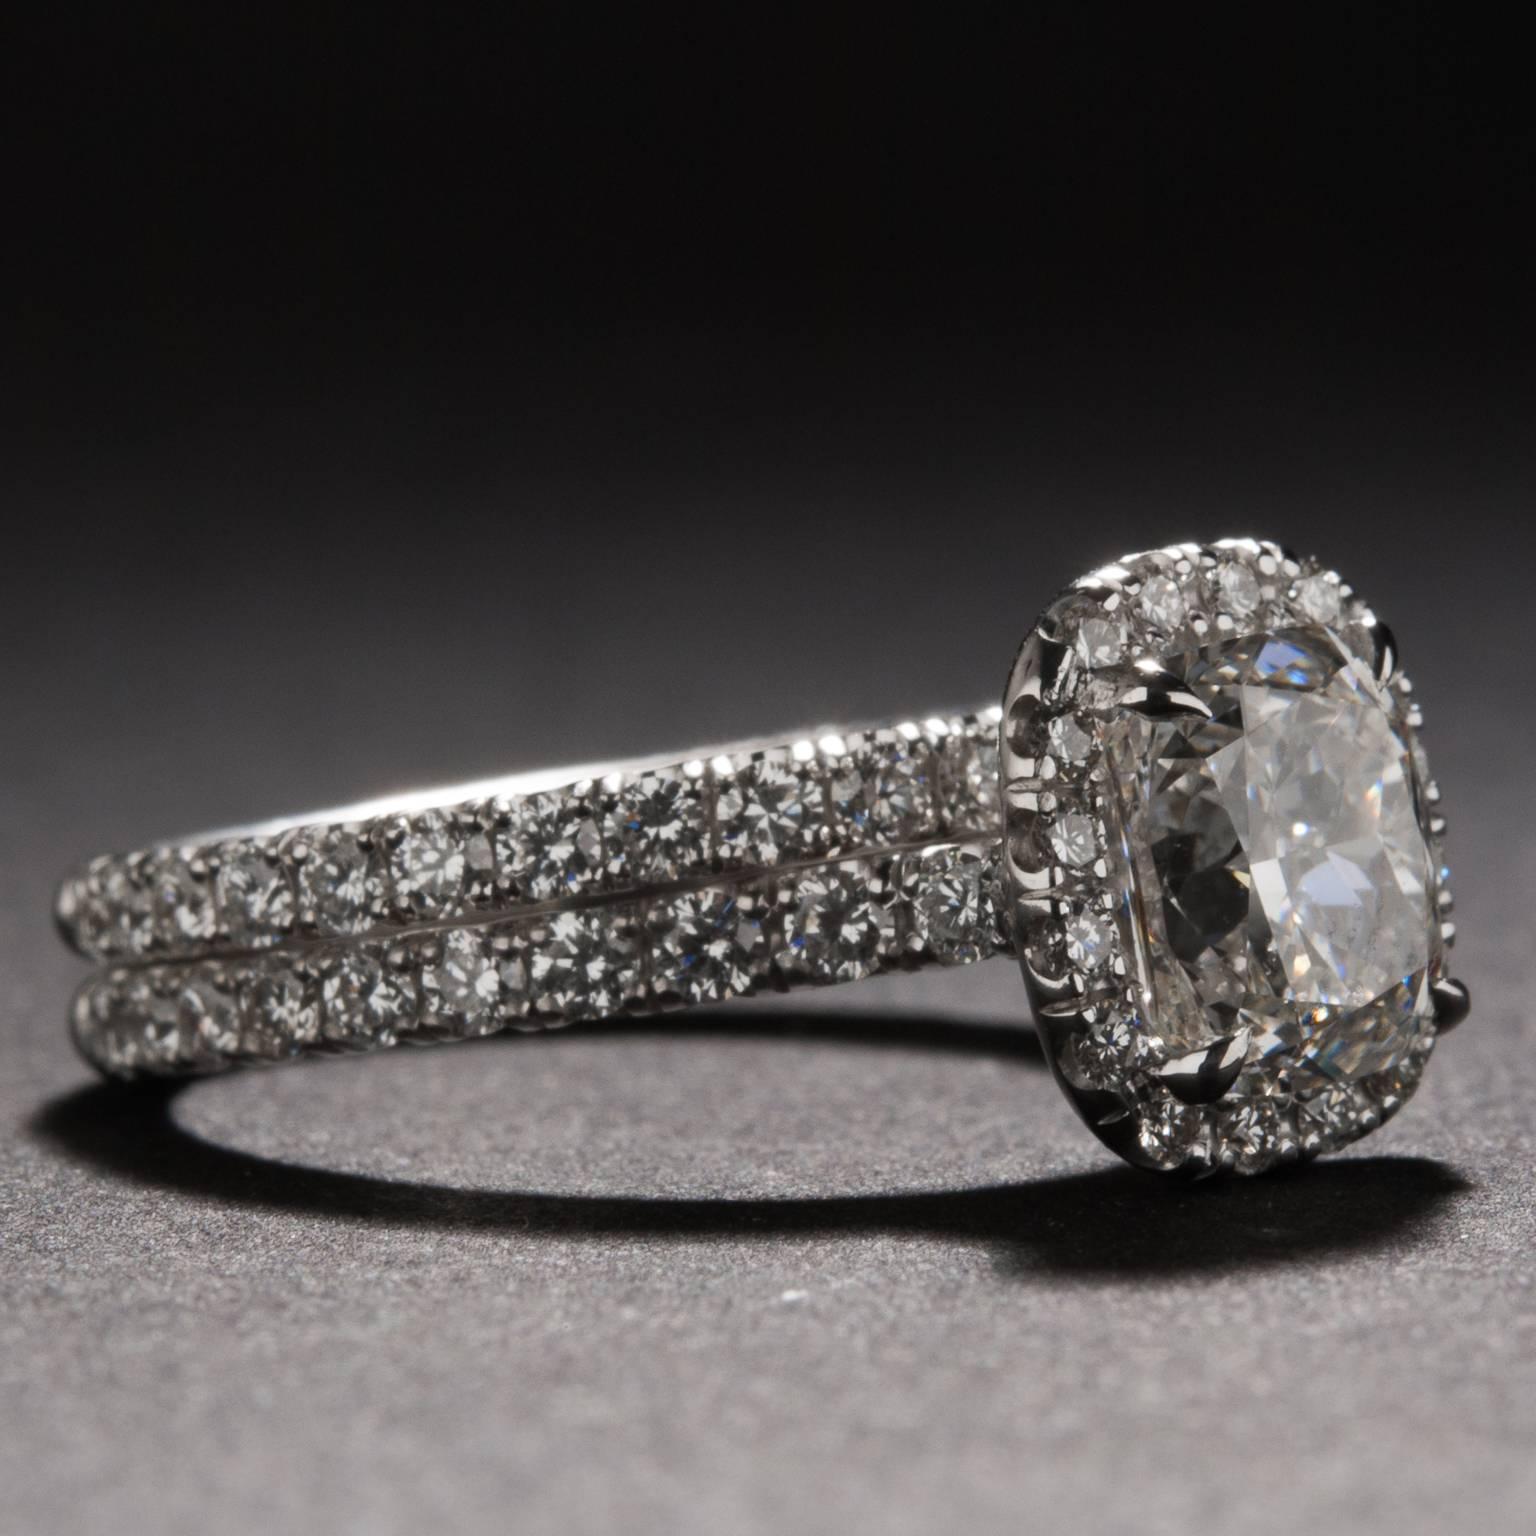 1.51ct GIA Cert Diamond Ring with Matching Diamond Band In New Condition For Sale In Carmel, CA